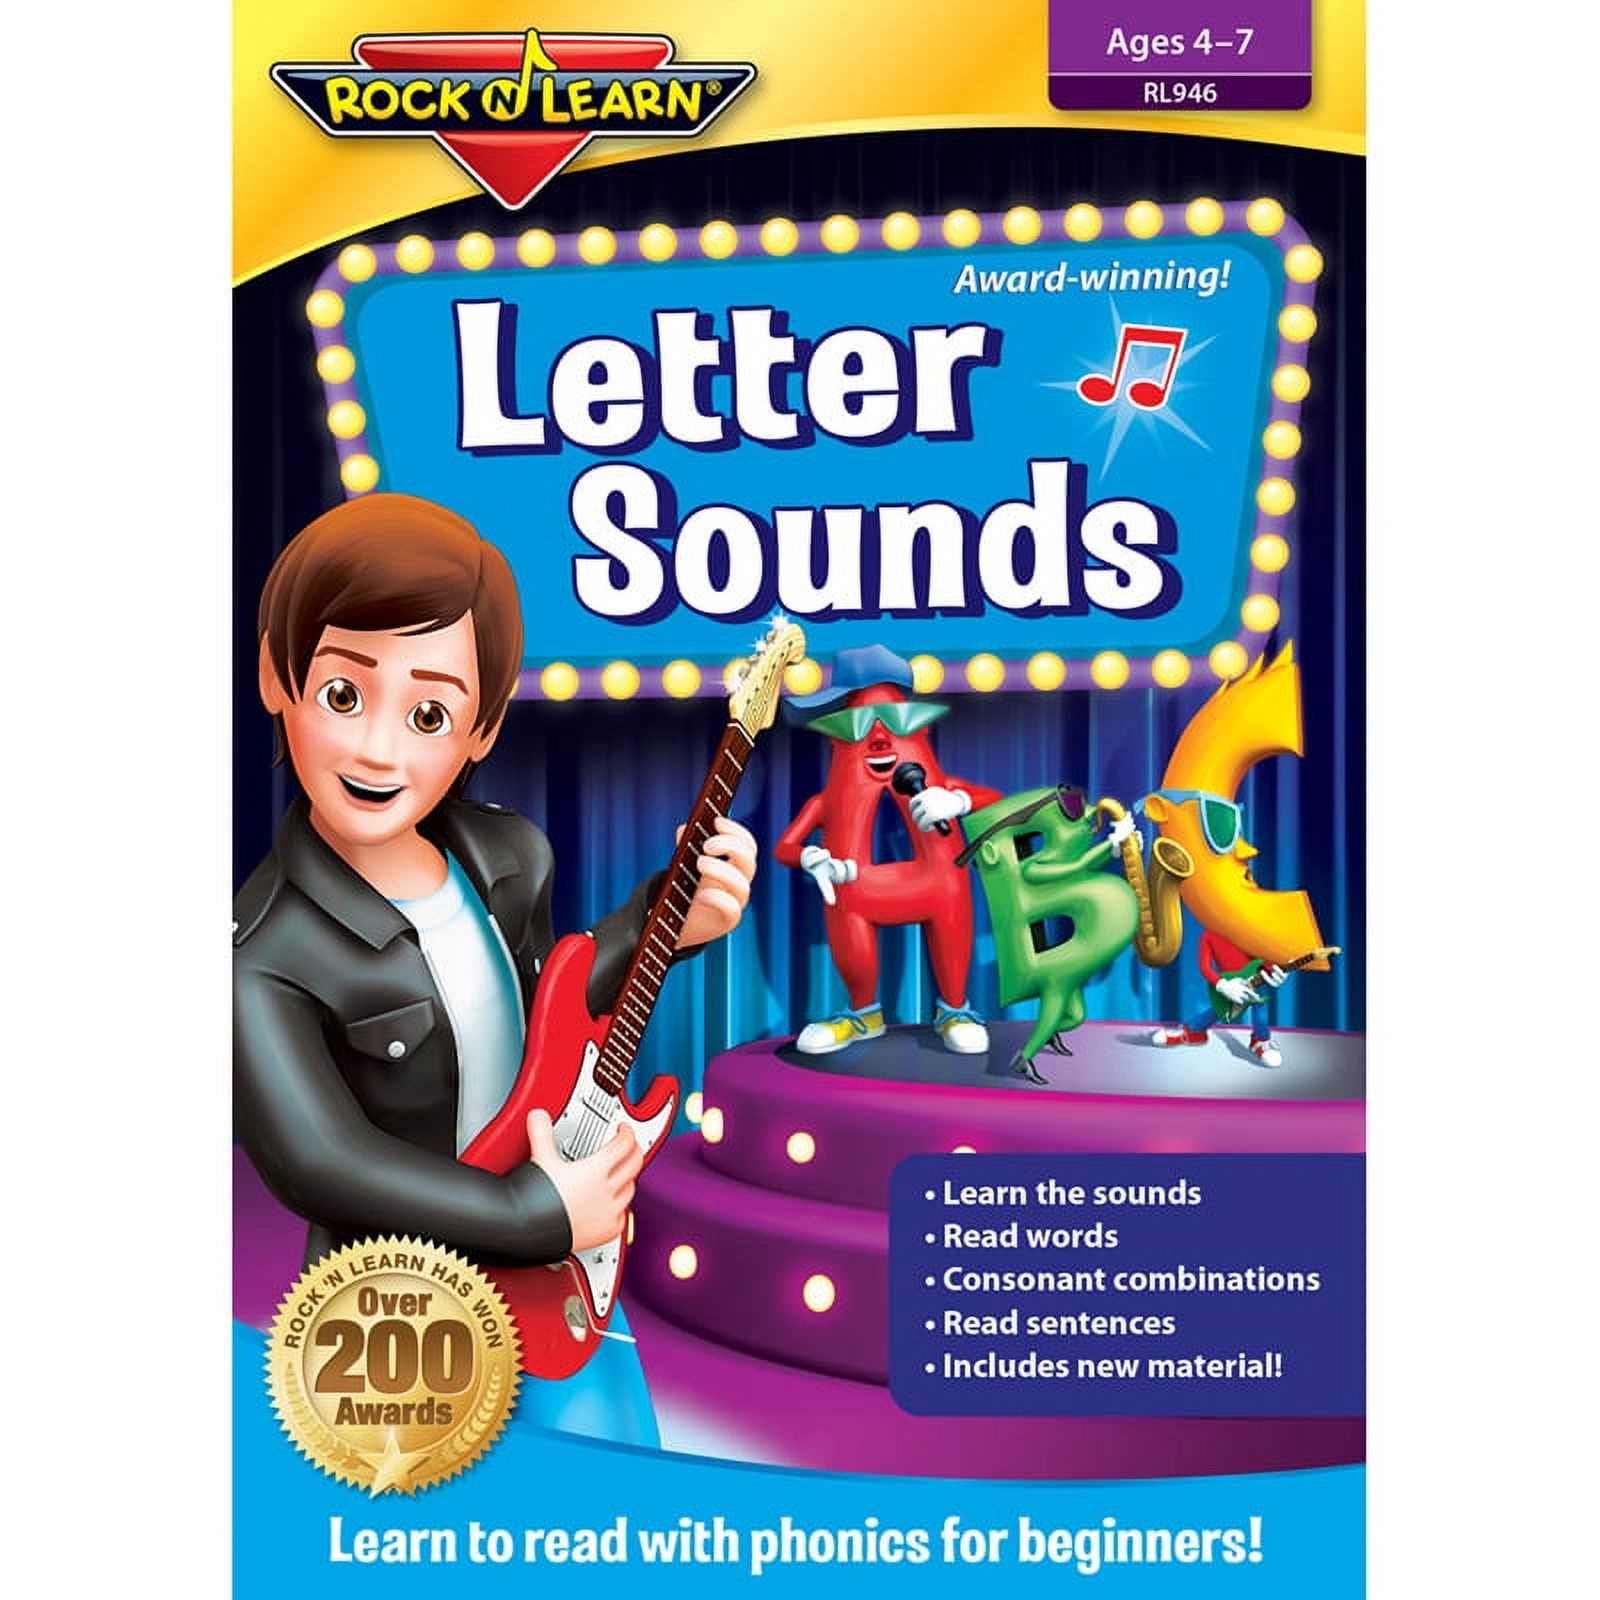 Rock N Learn: Letter Sounds (DVD) - image 1 of 2